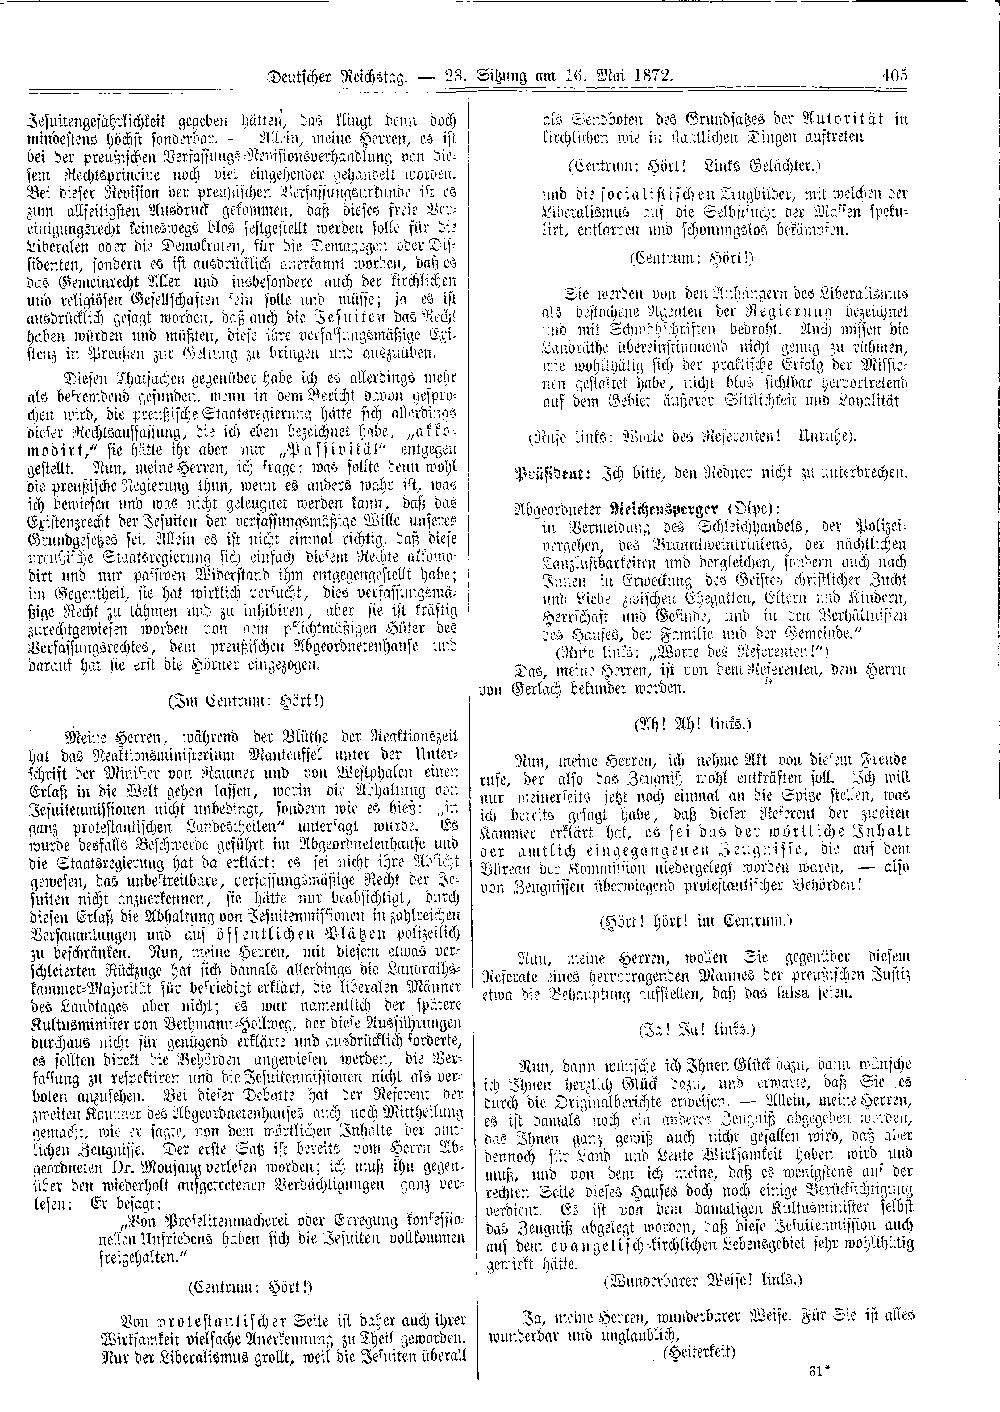 Scan of page 405